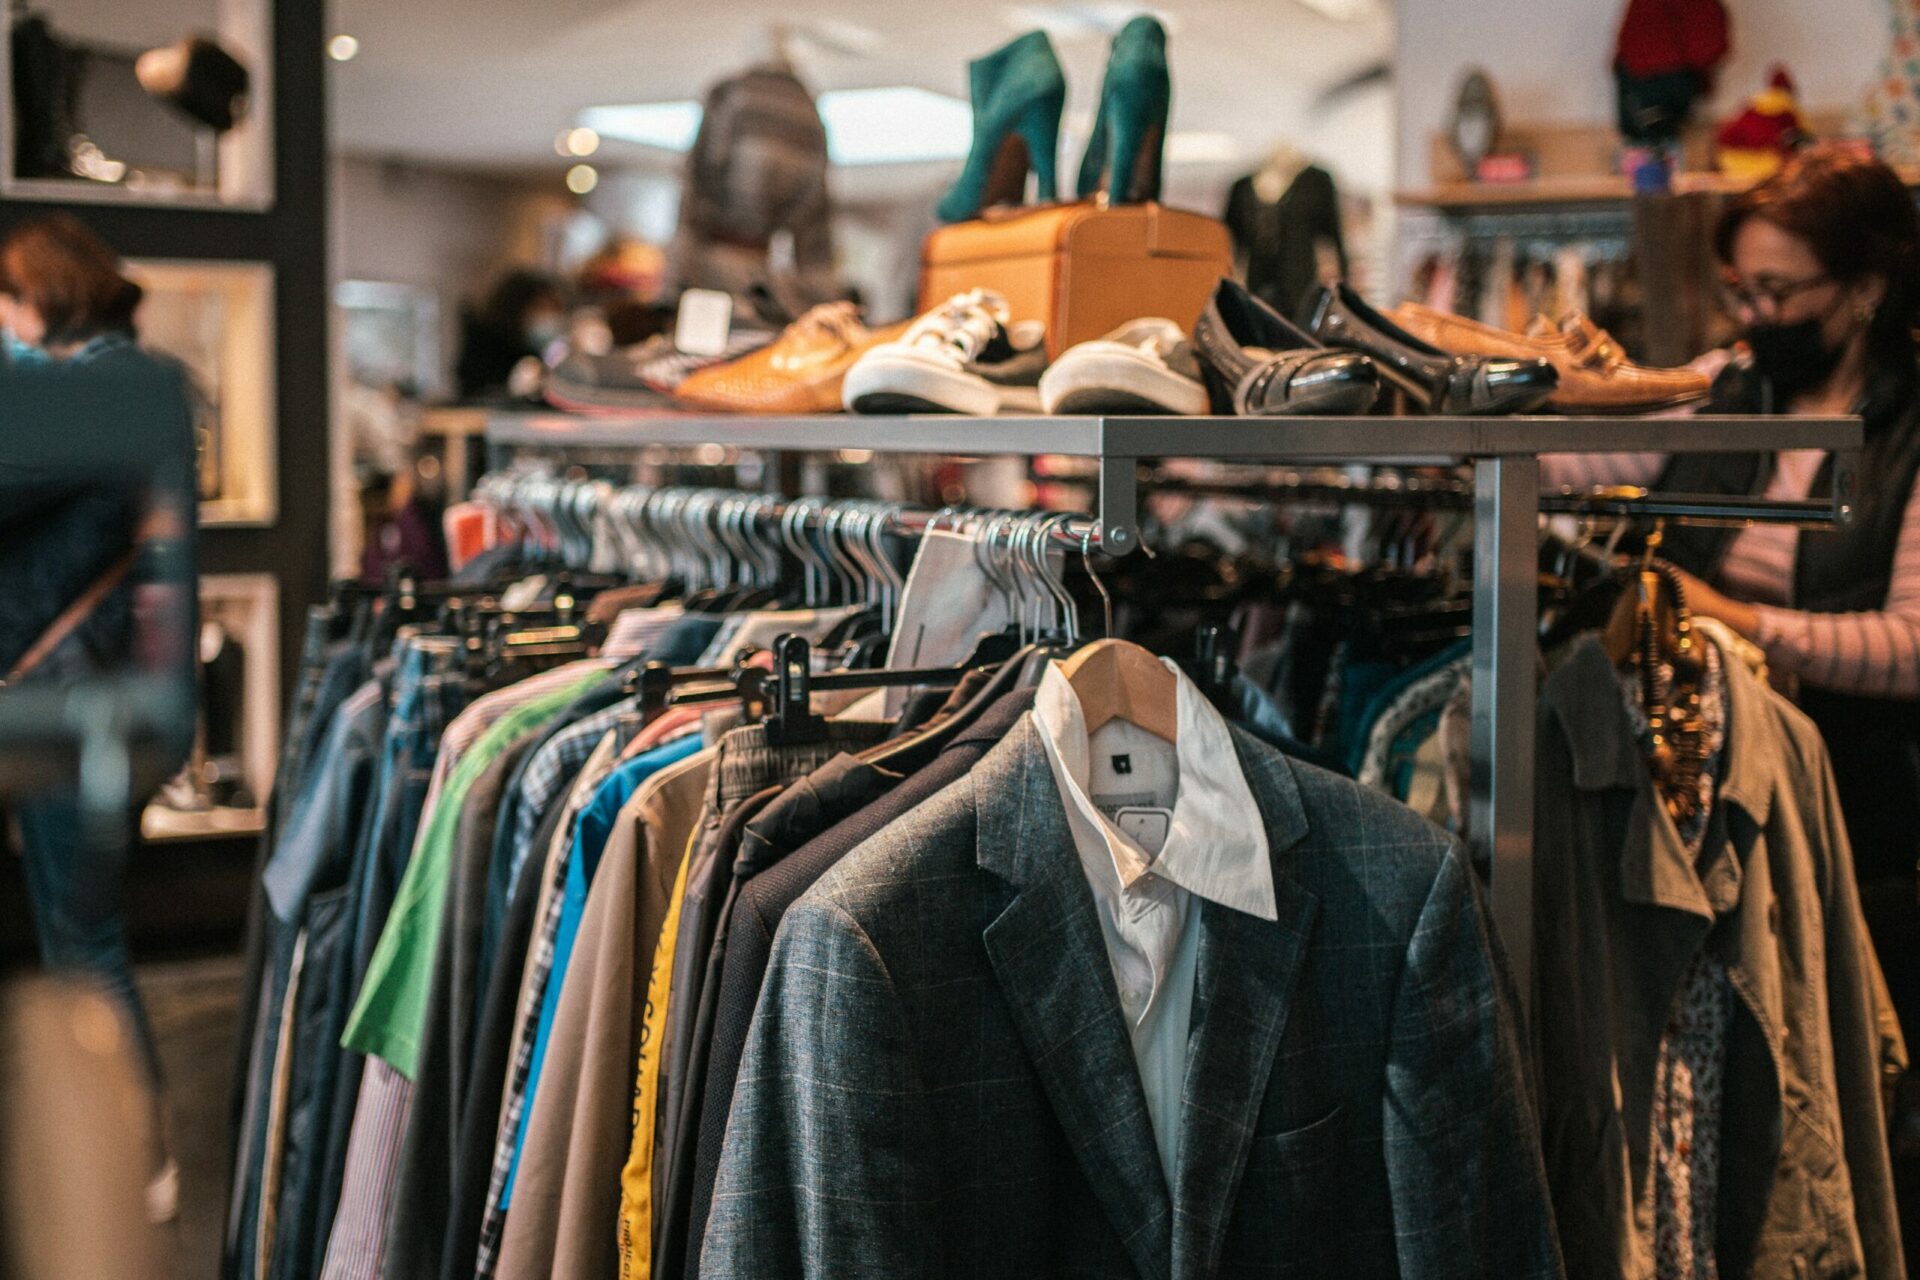 The Ultimate List: 12 Thrift Stores in Boston Every Eco-Friendly Shopper Must Visit